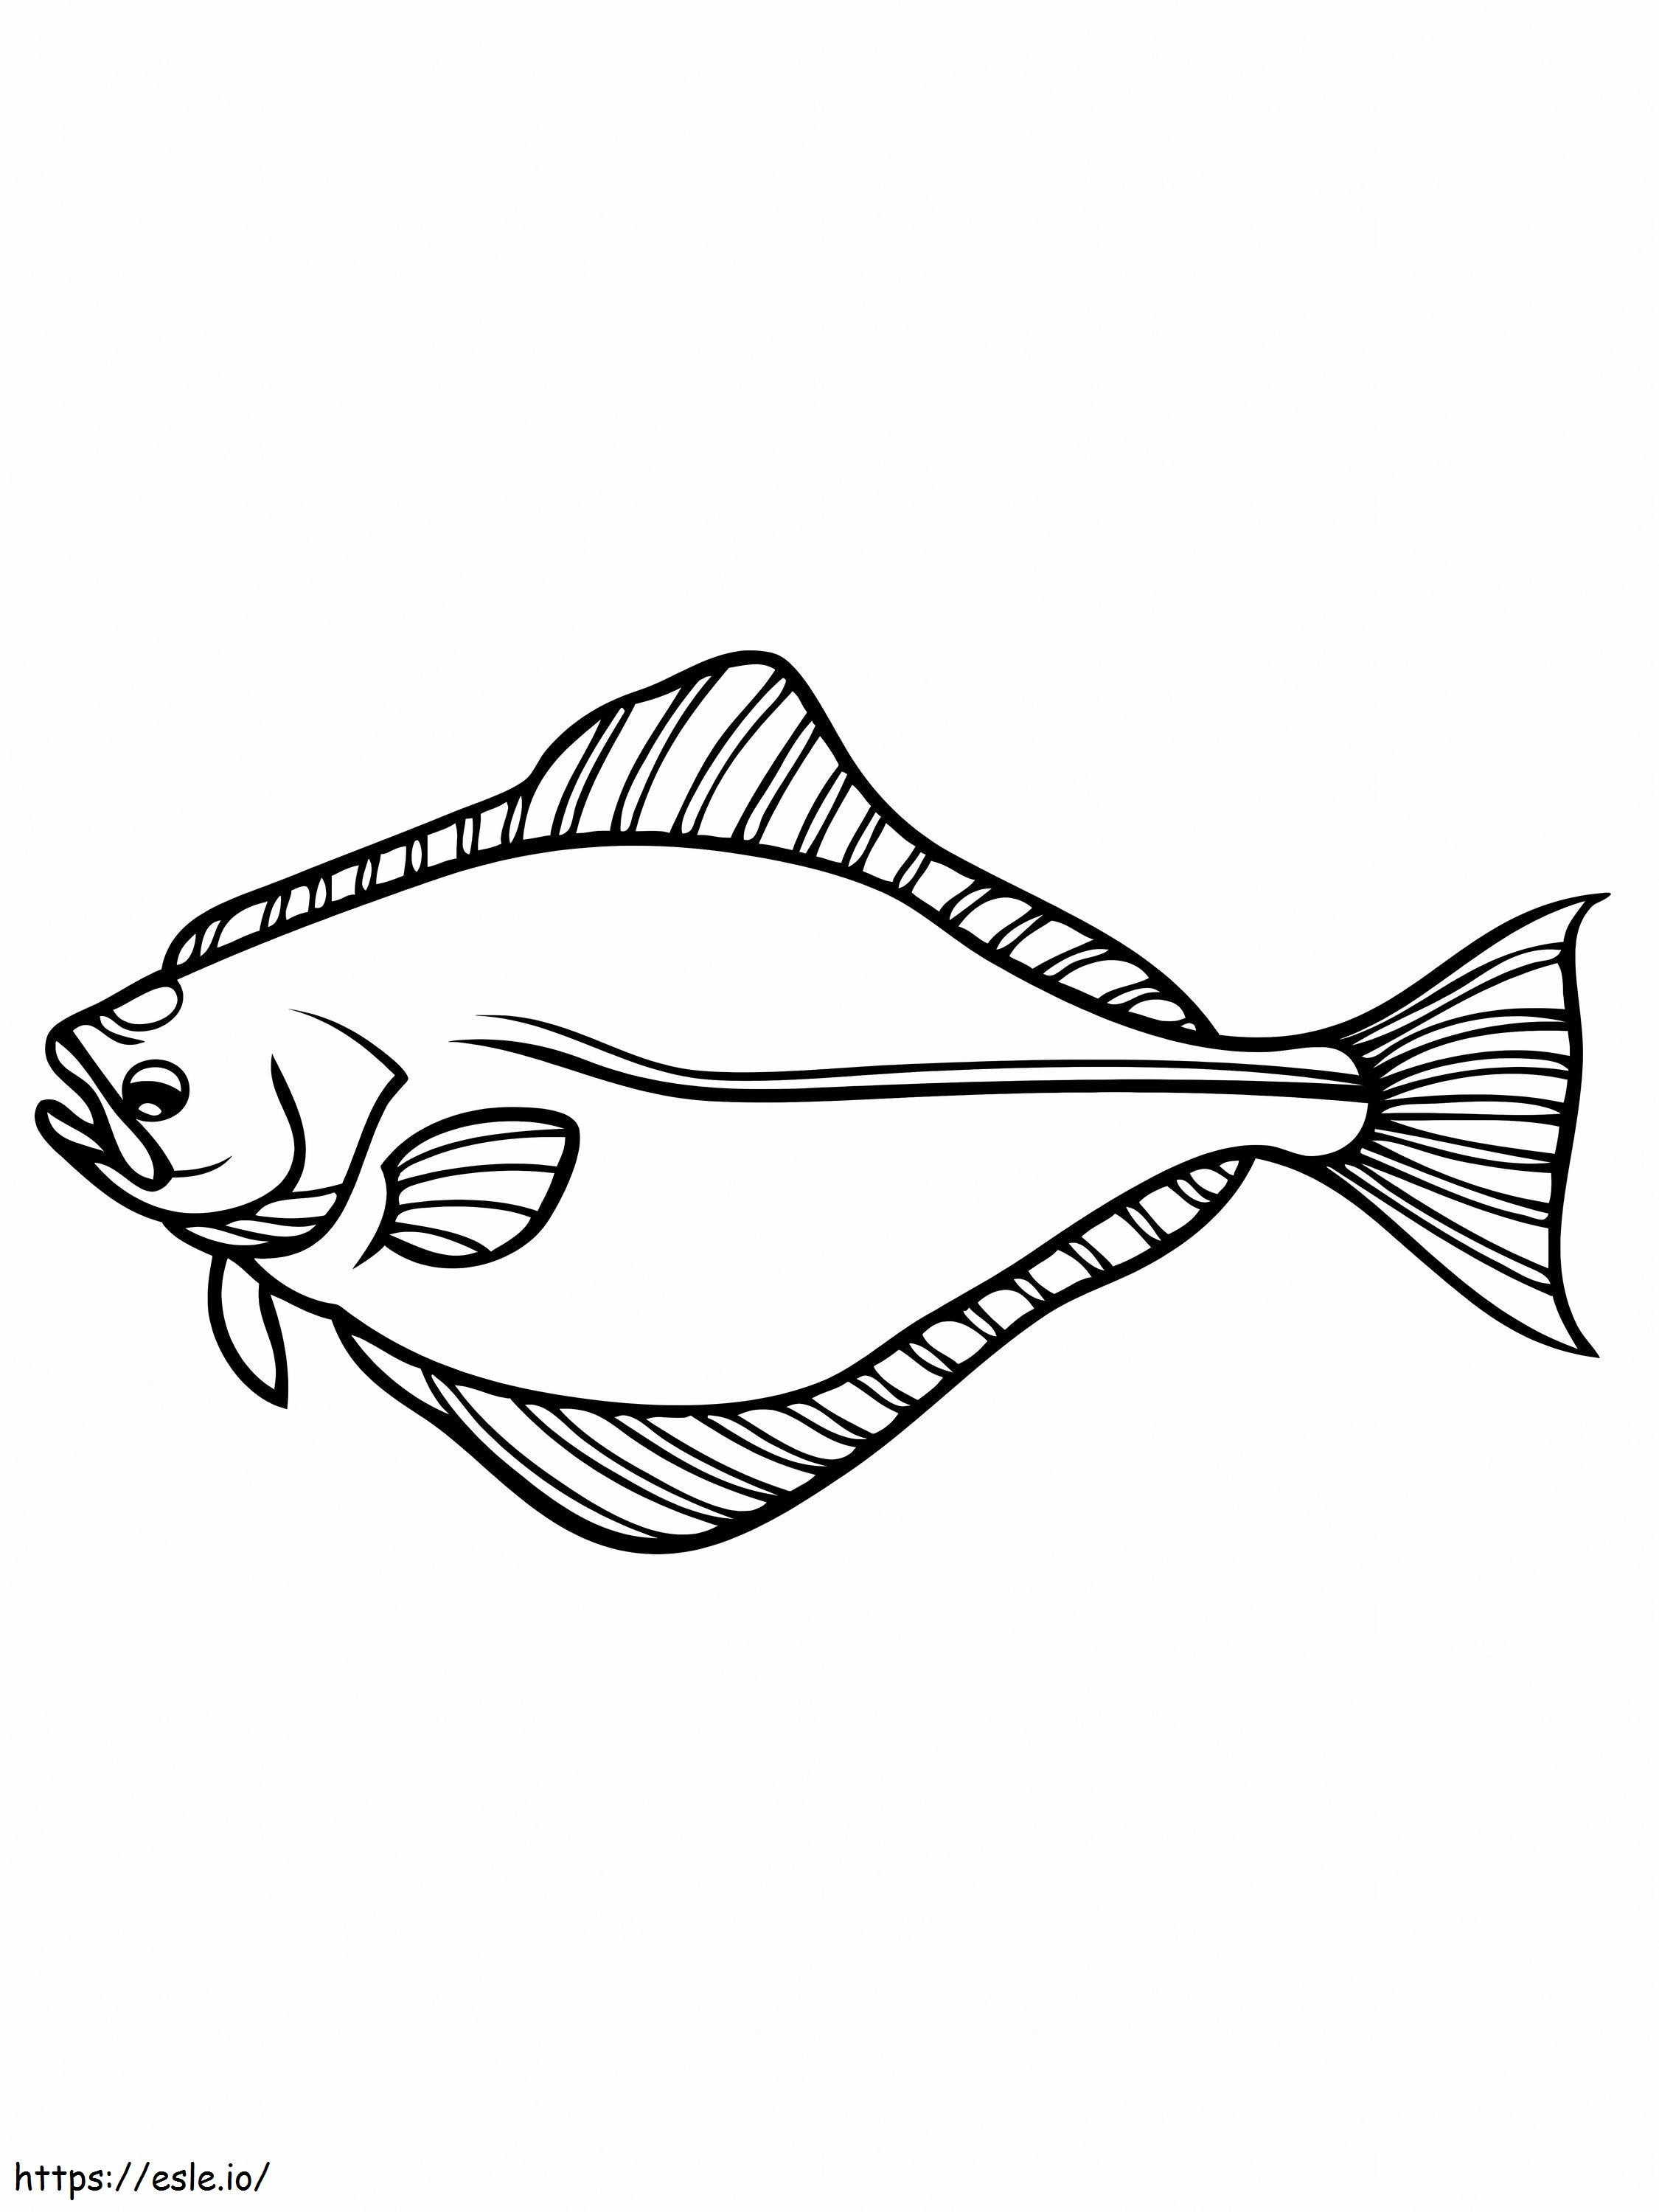 Halibut coloring page